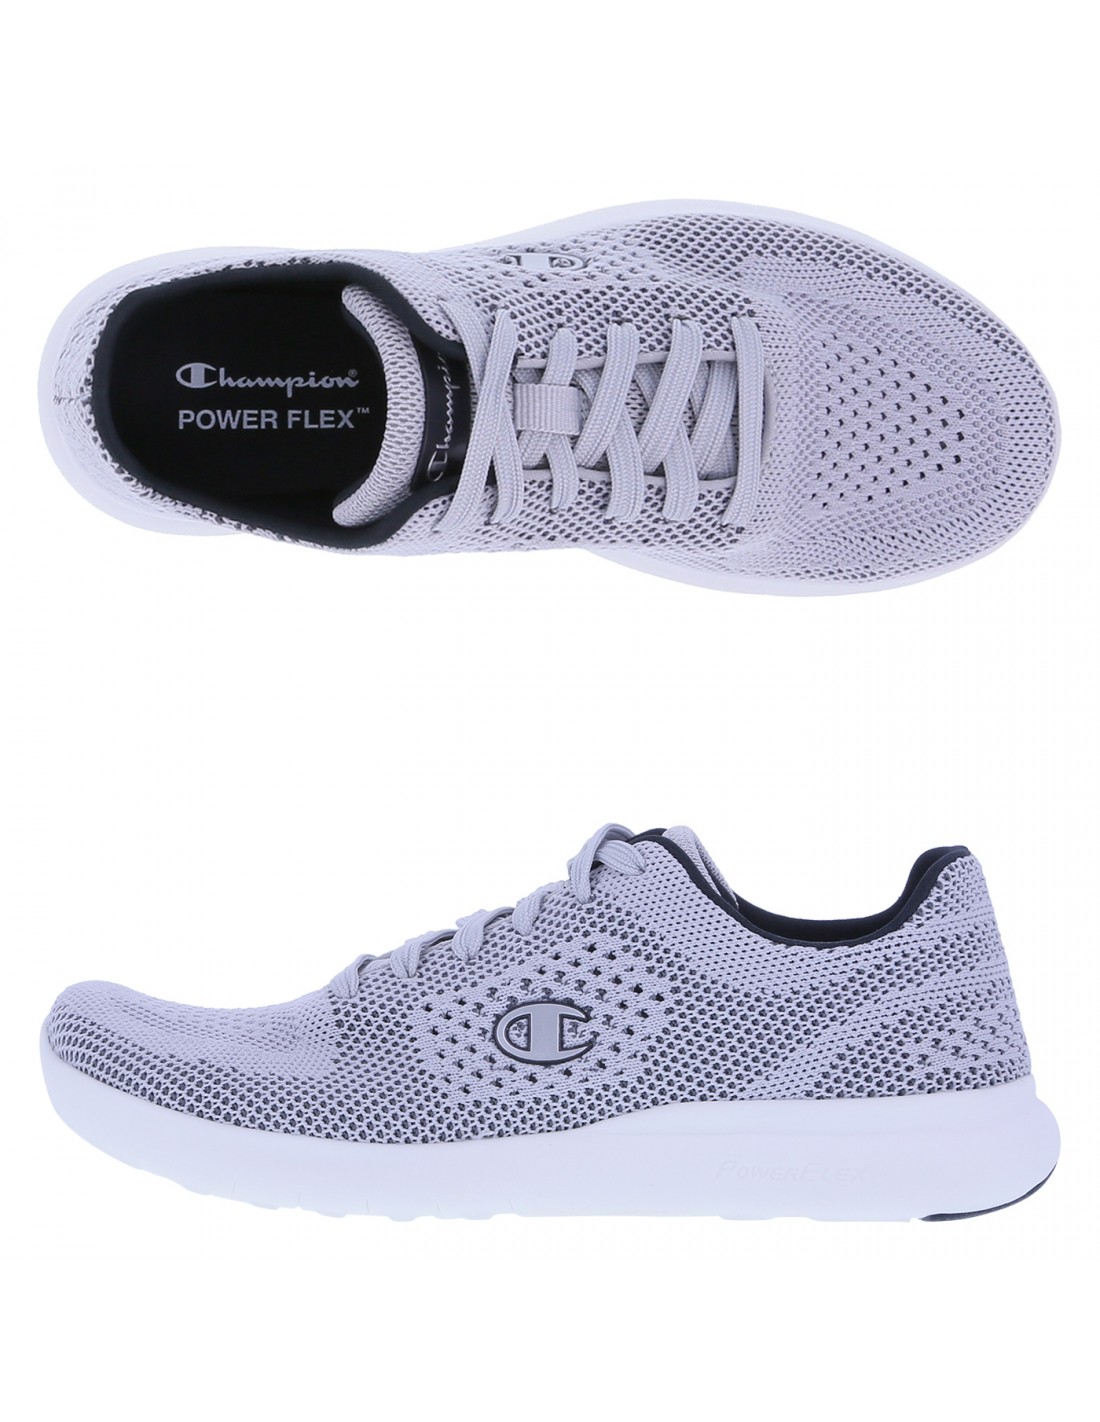 payless champion running shoes review